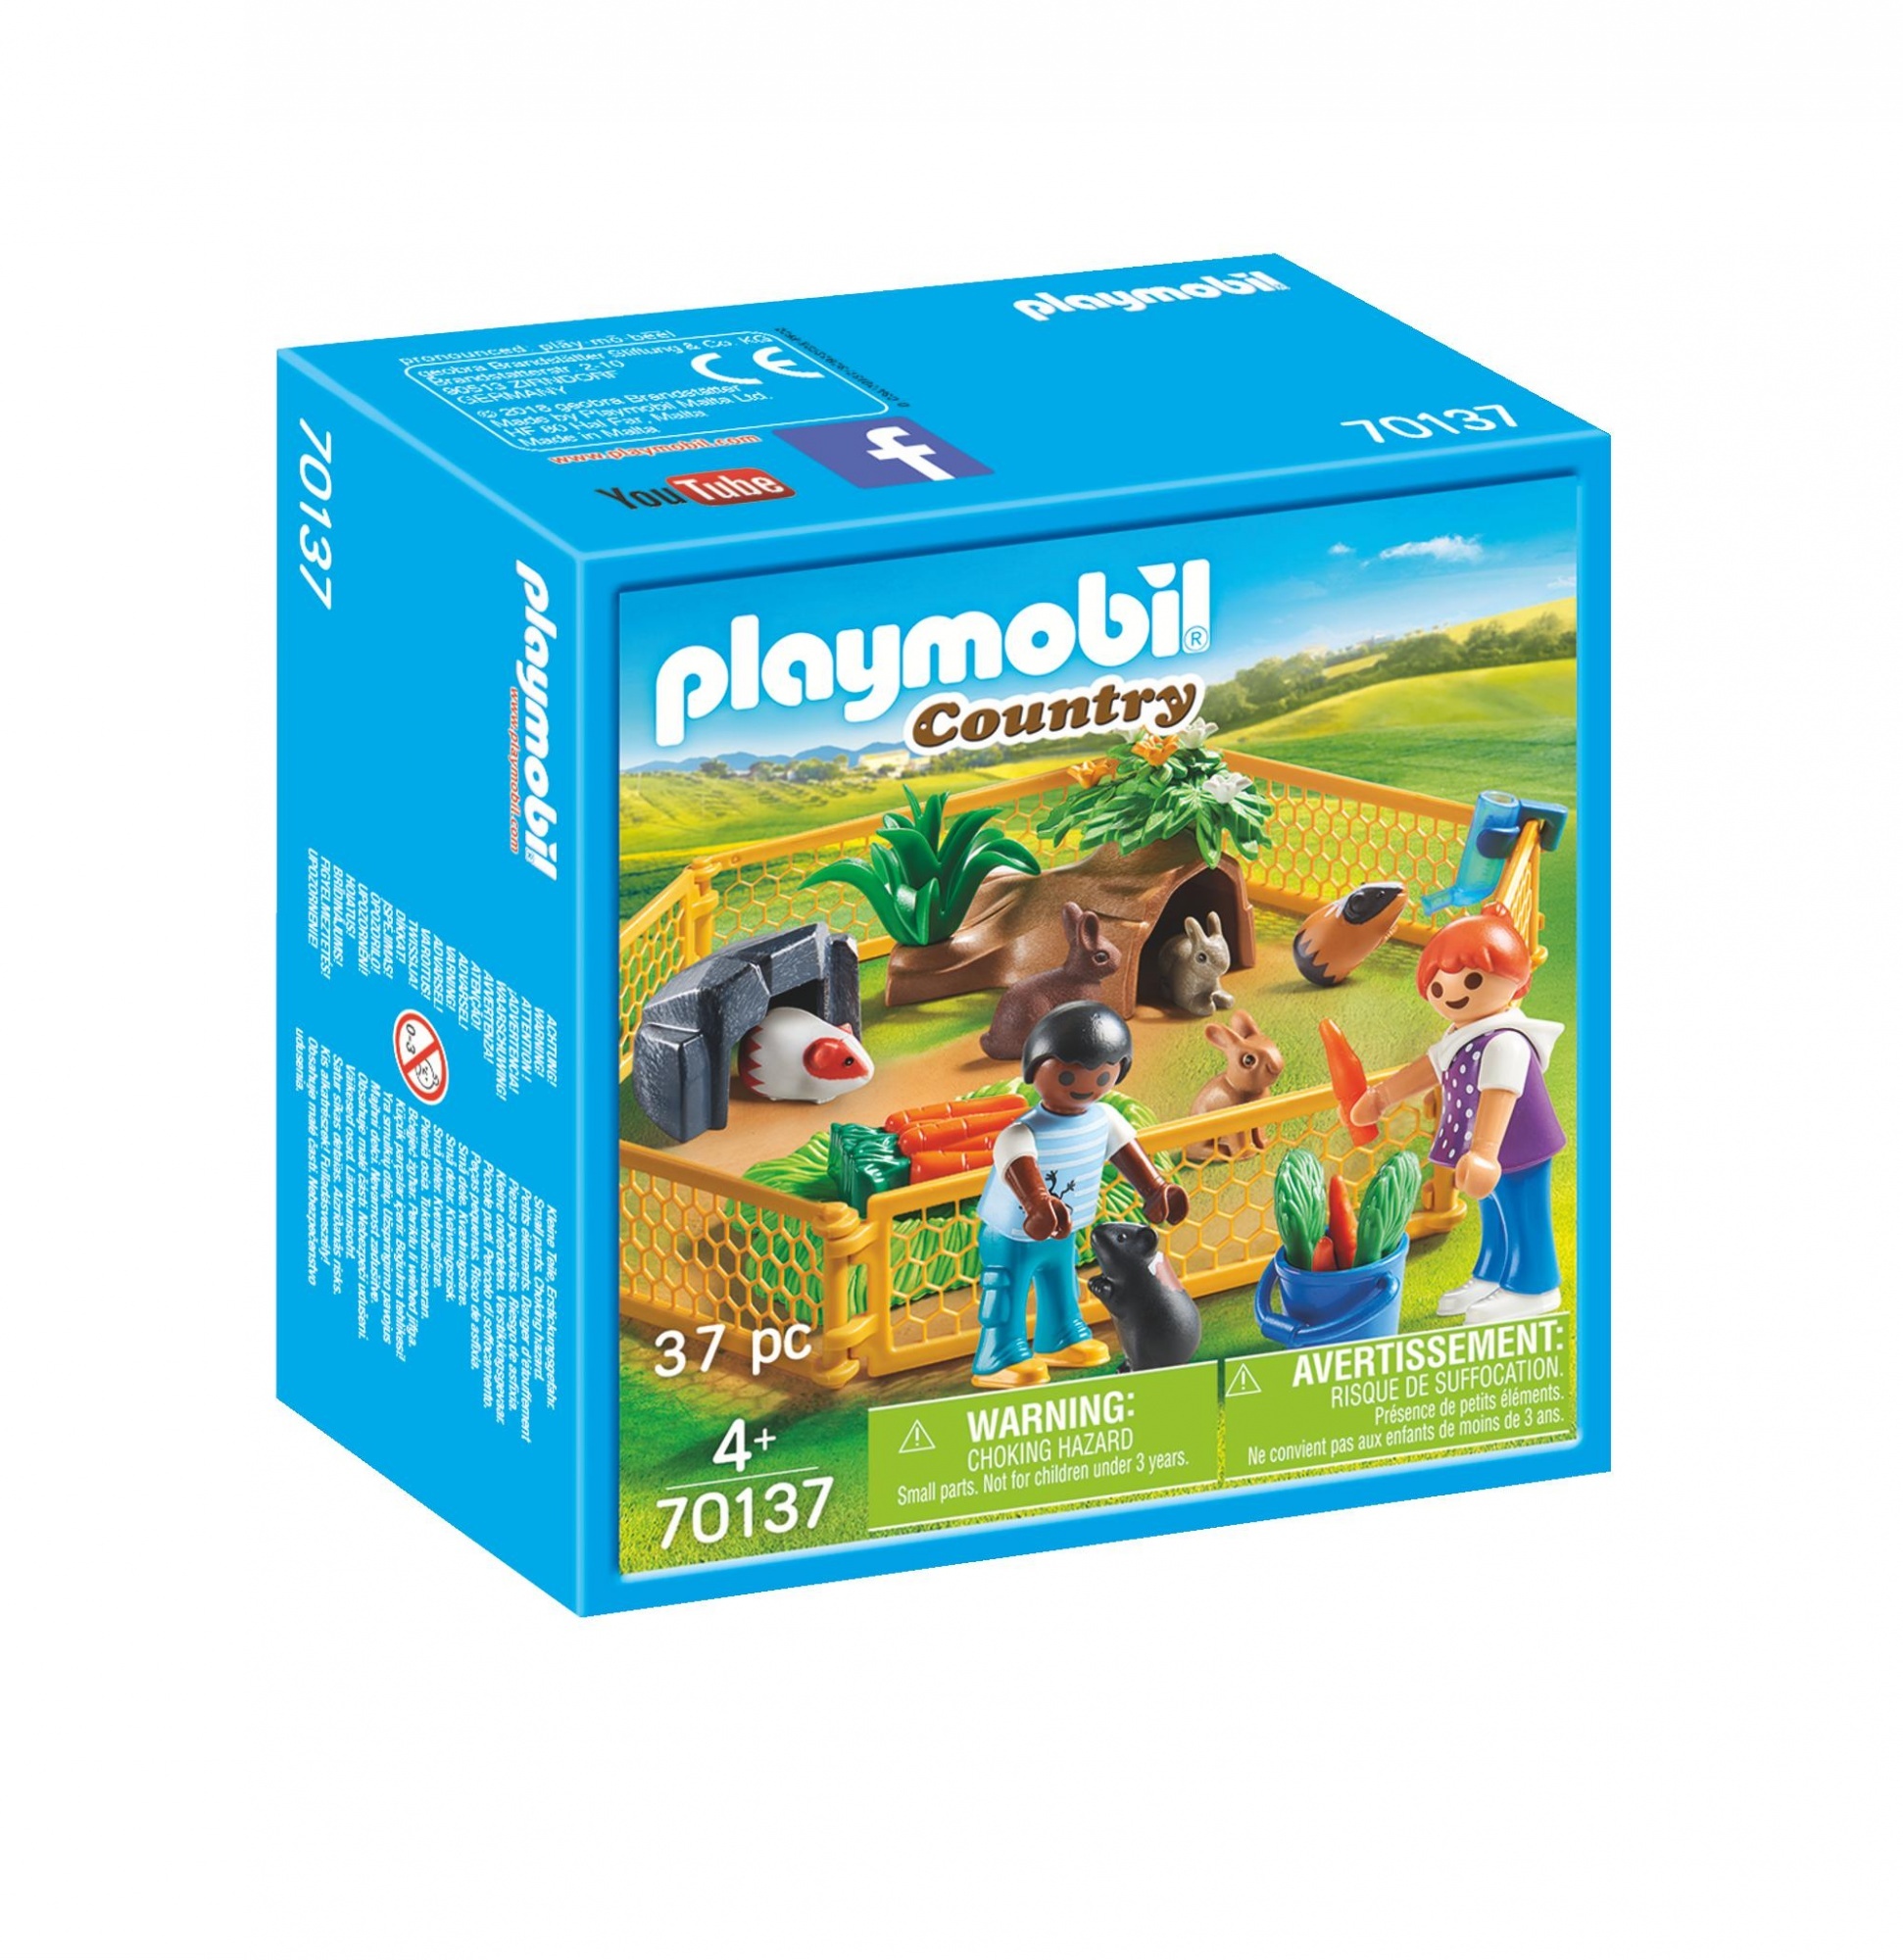 playmobil Country 70137